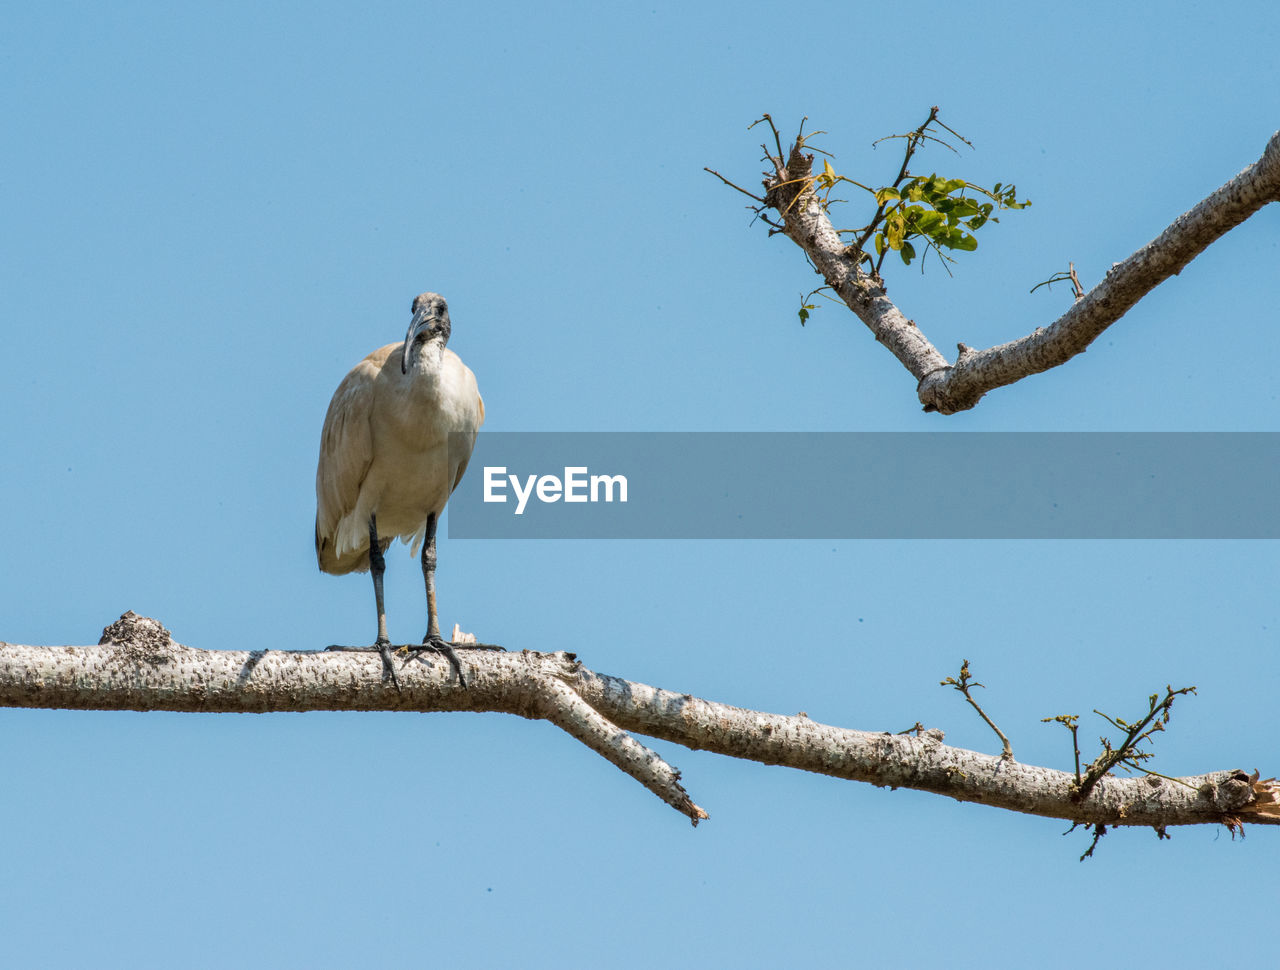 LOW ANGLE VIEW OF BIRD PERCHING ON TREE